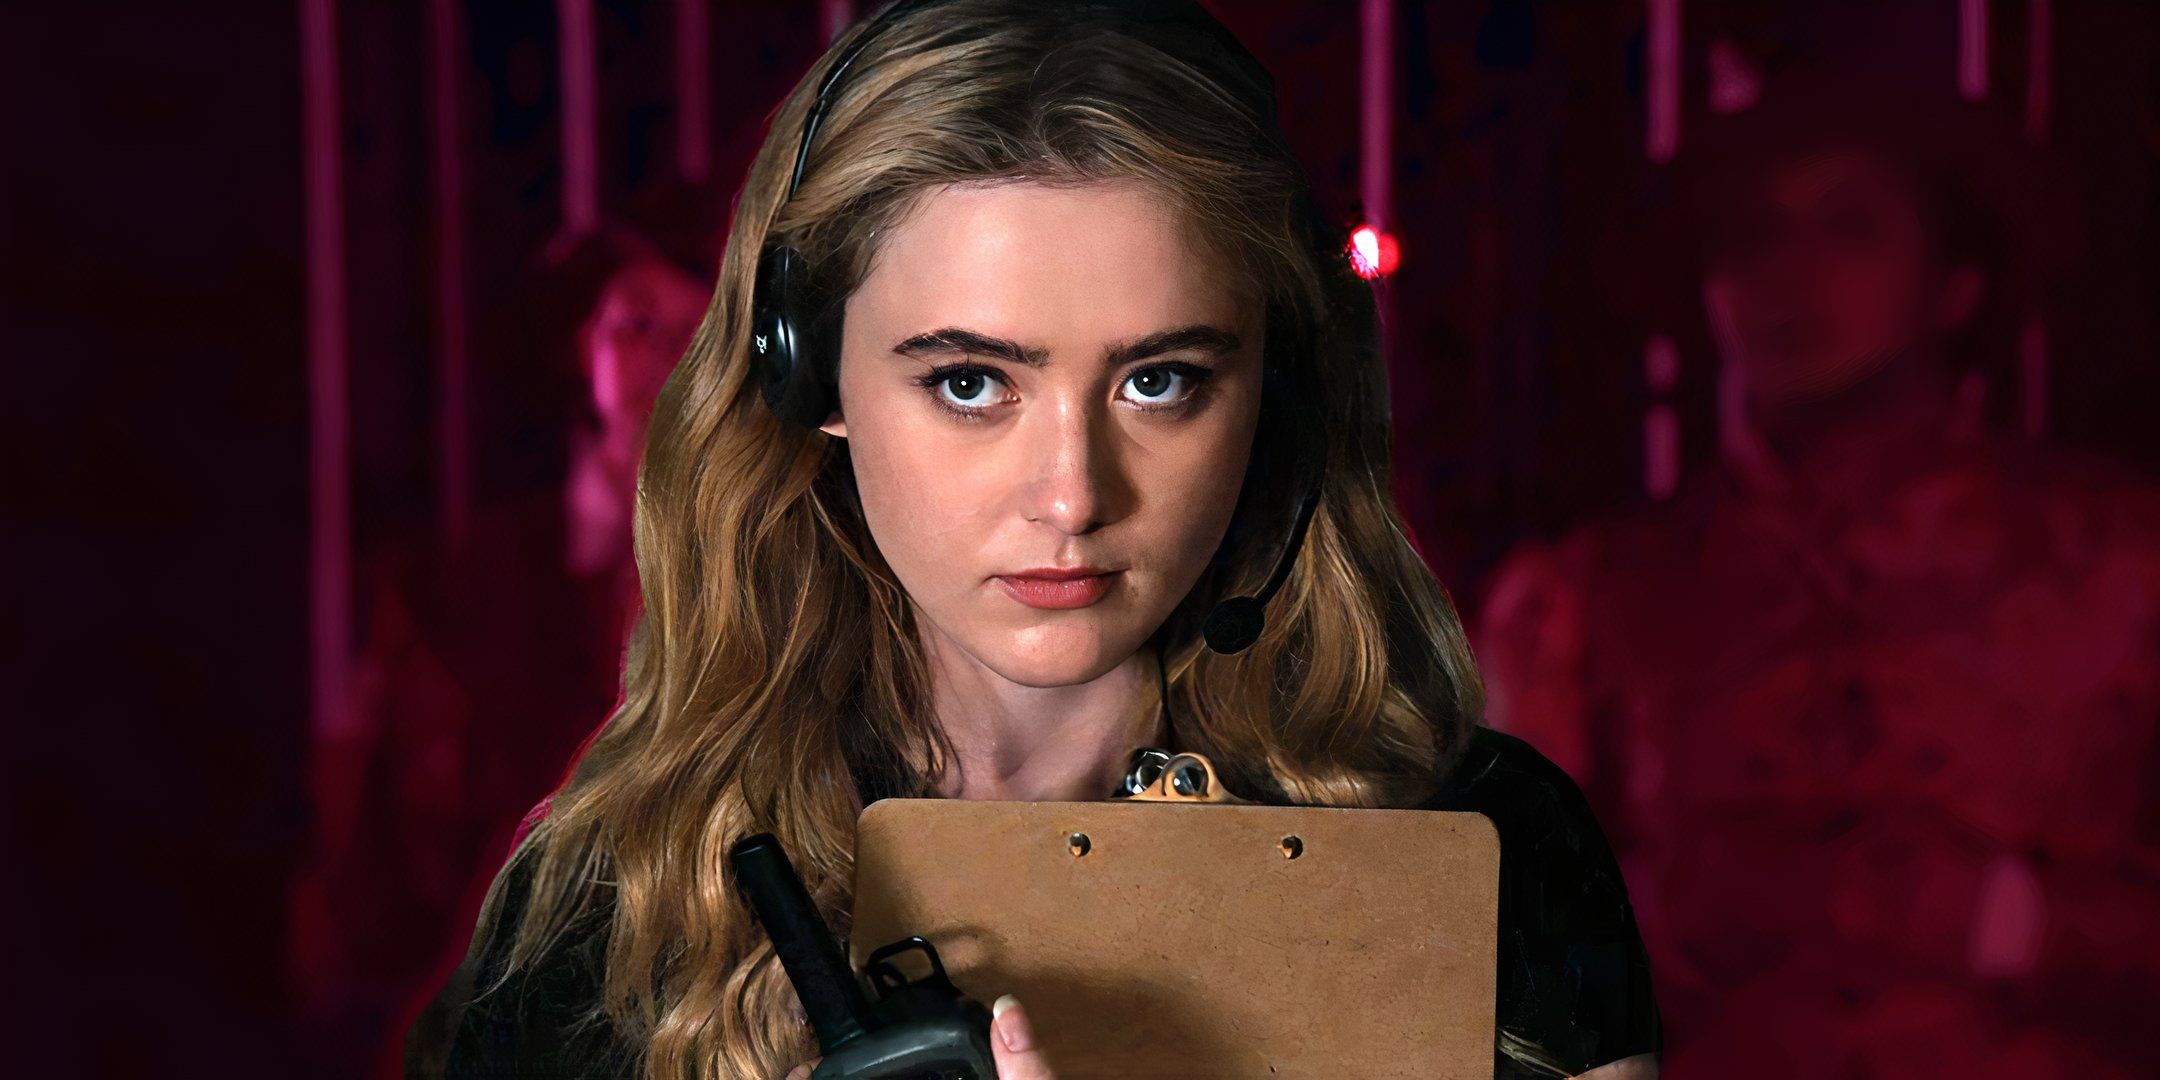 Kathryn Newton as Allie looking serious and holding a clipboard in The Society